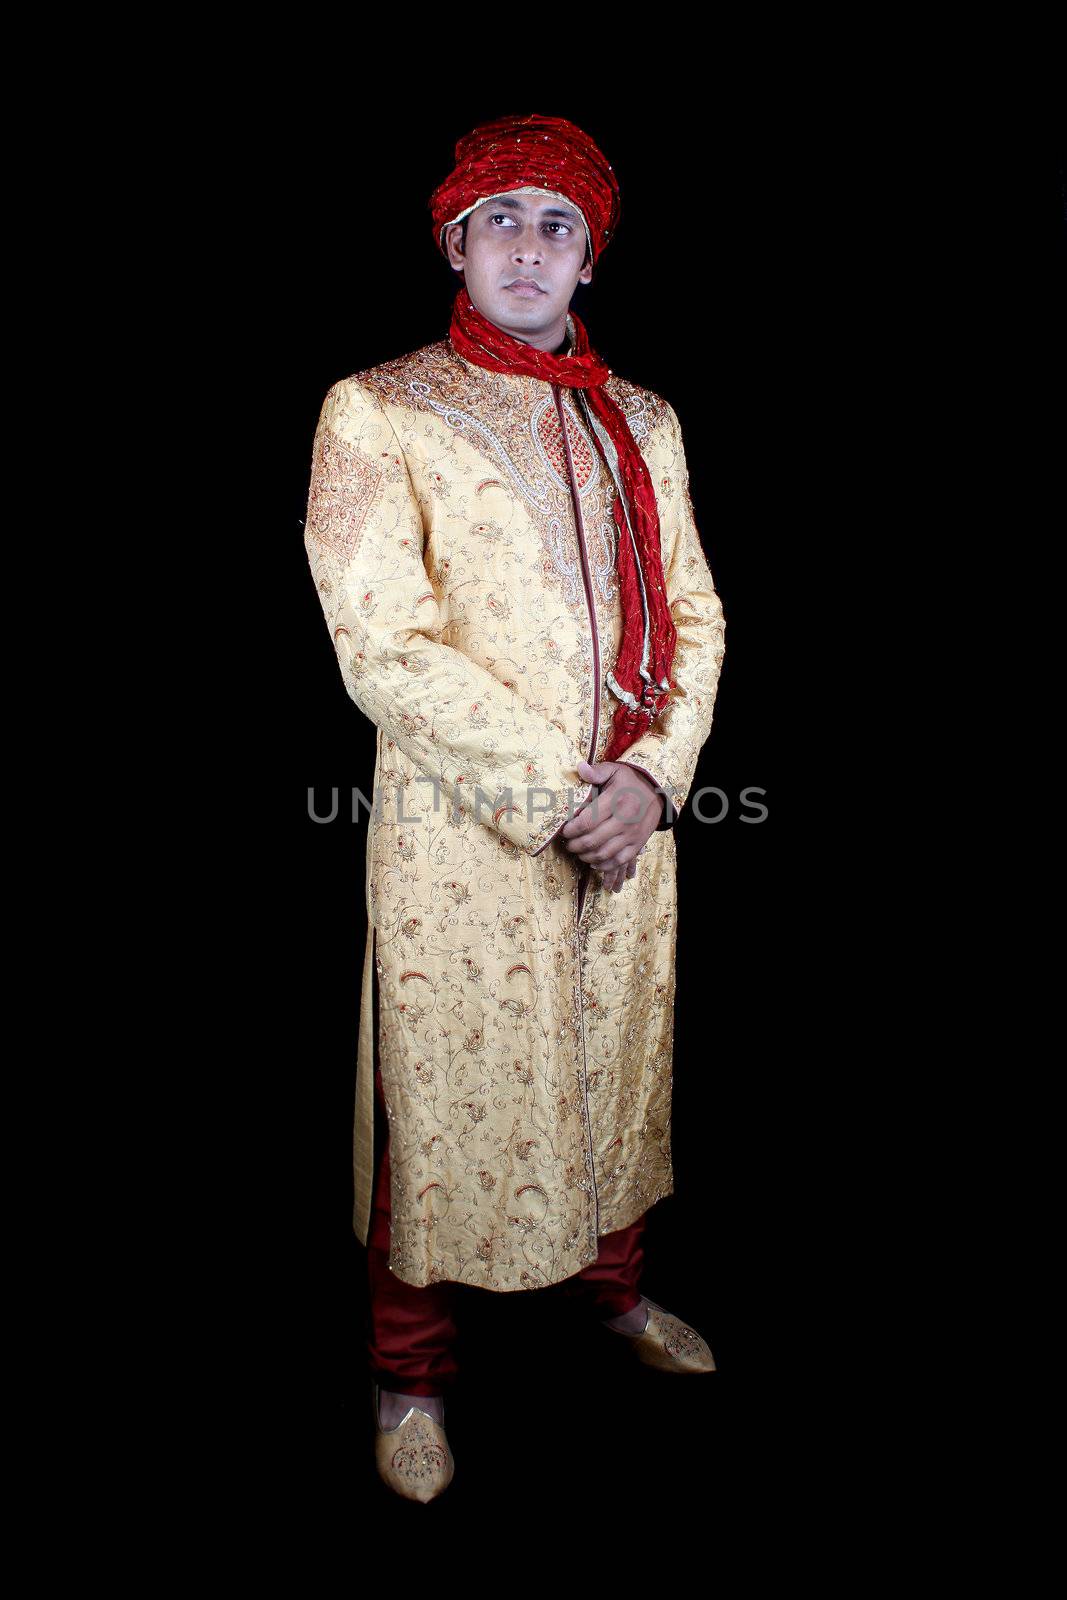 An Indian man posed as a Royal Afghan man, on black studio background.